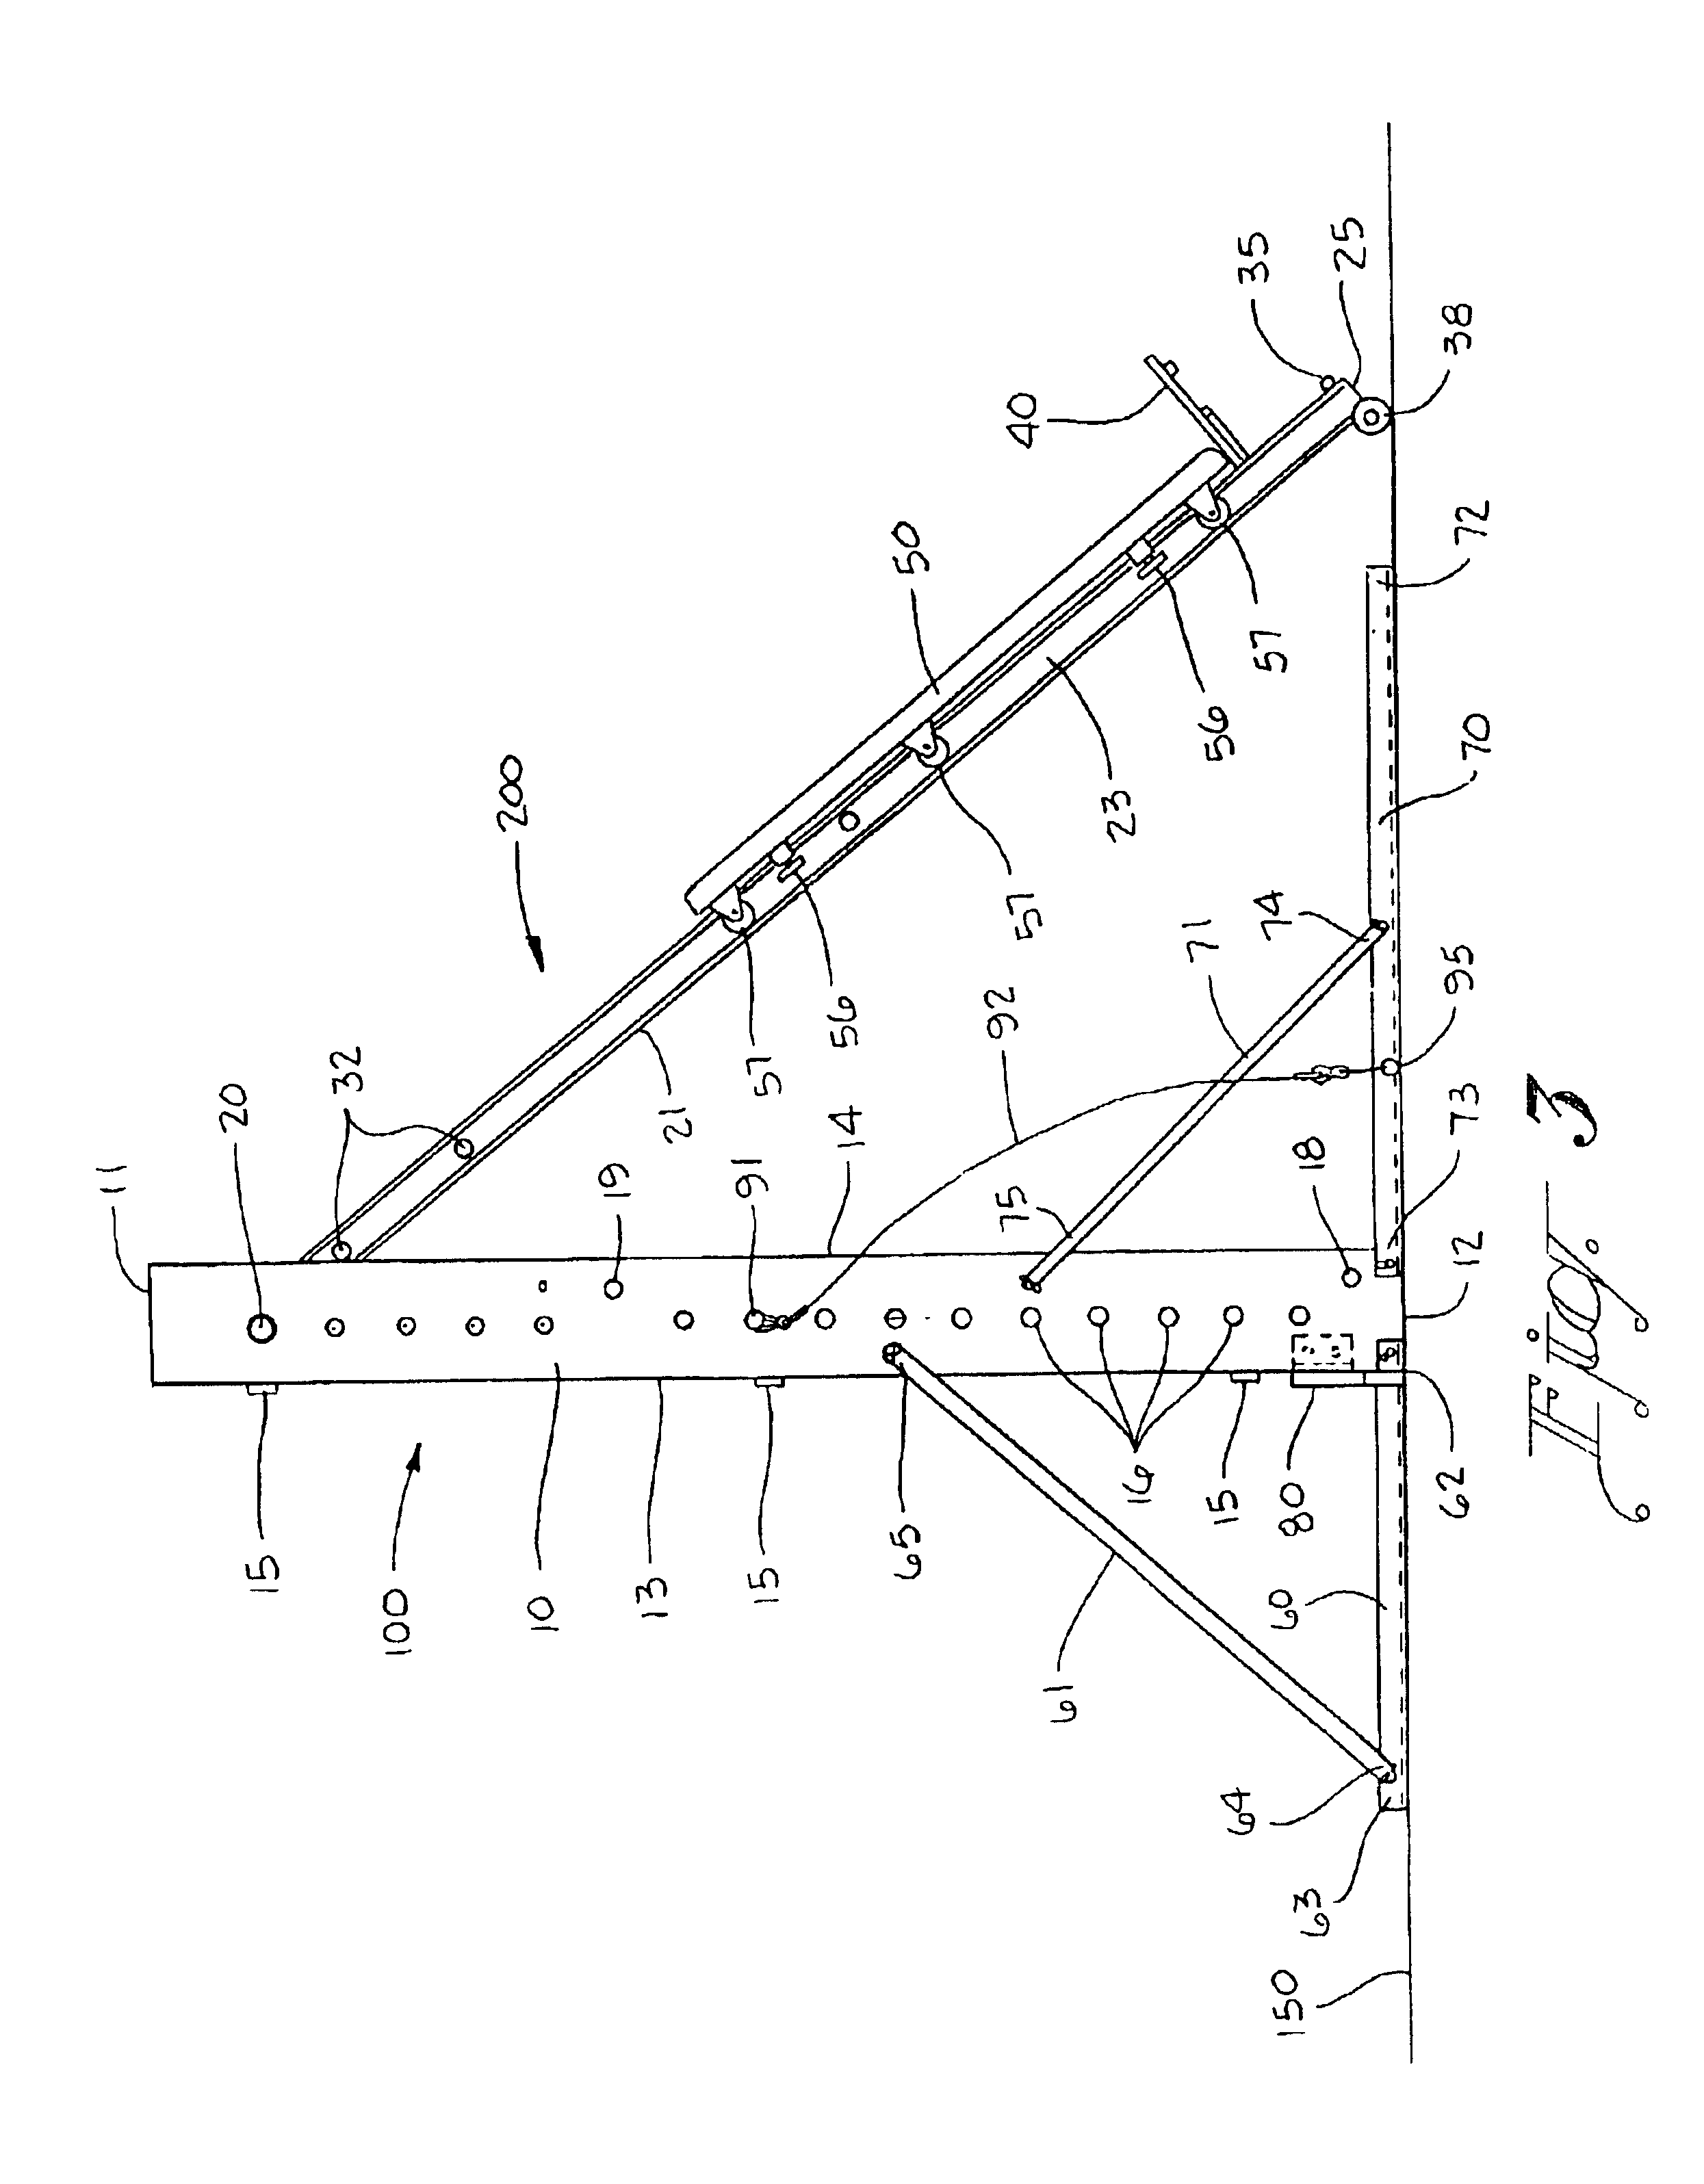 Exercise apparatus and method of collapsing the same